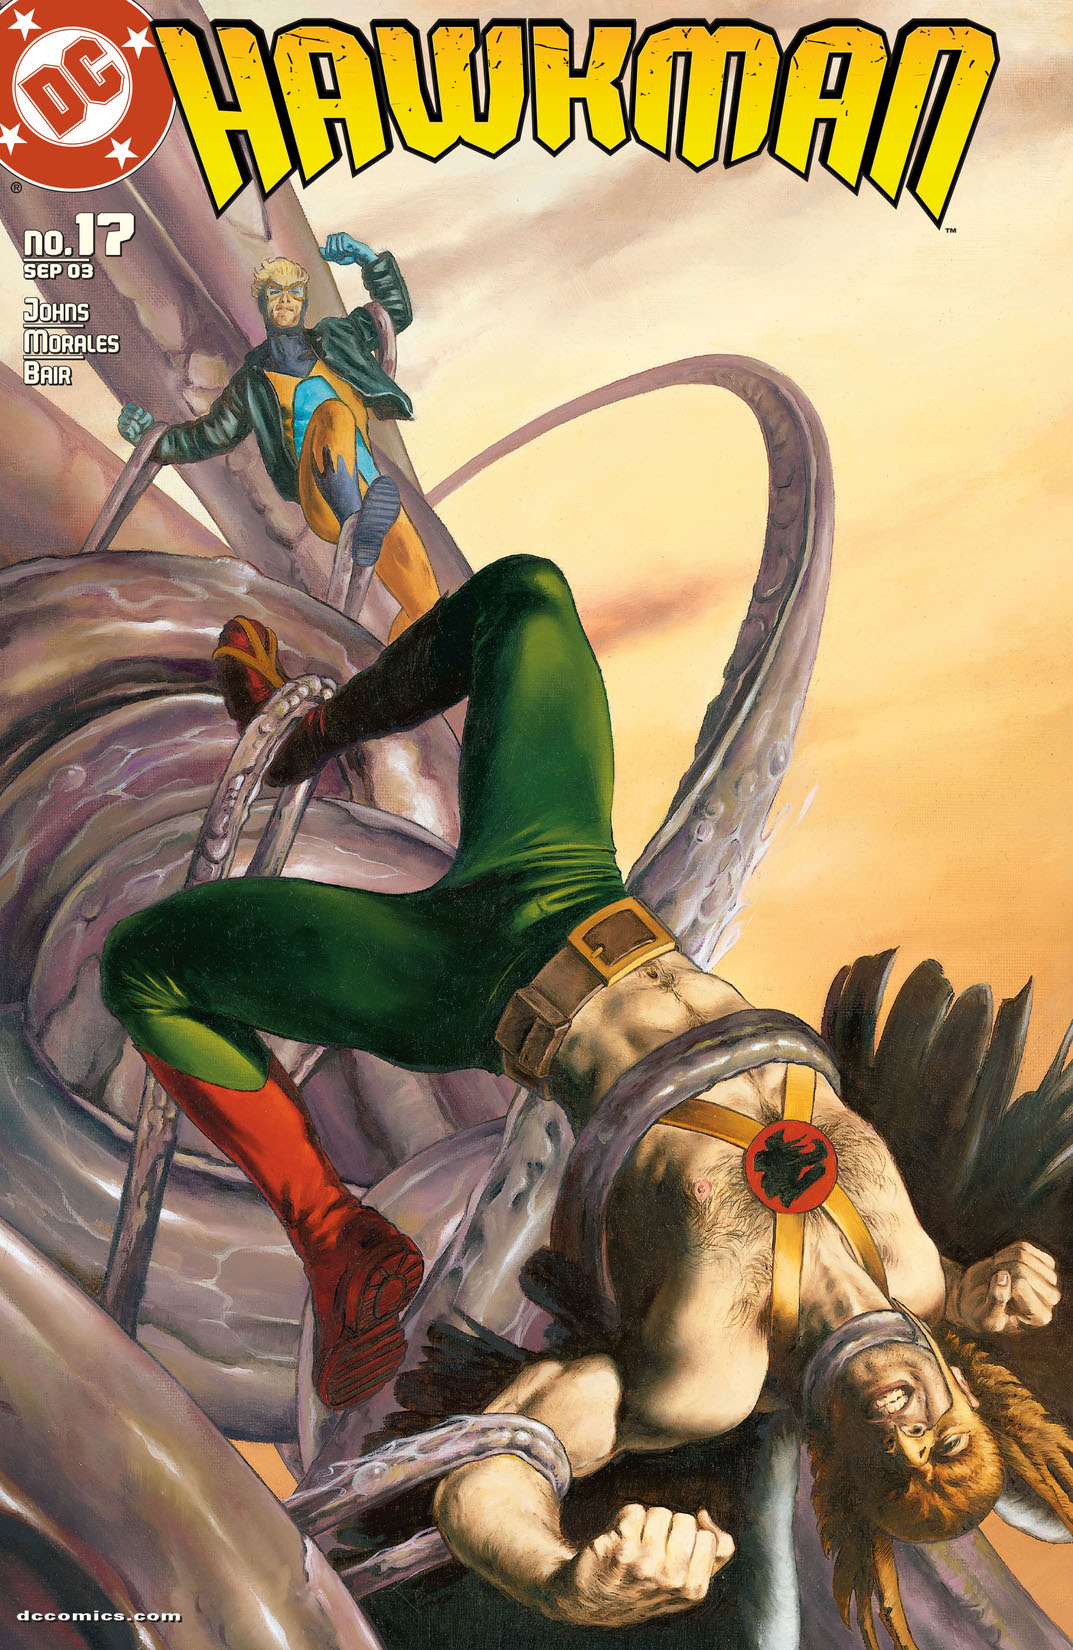 Hawkman (2002-) #17 preview images